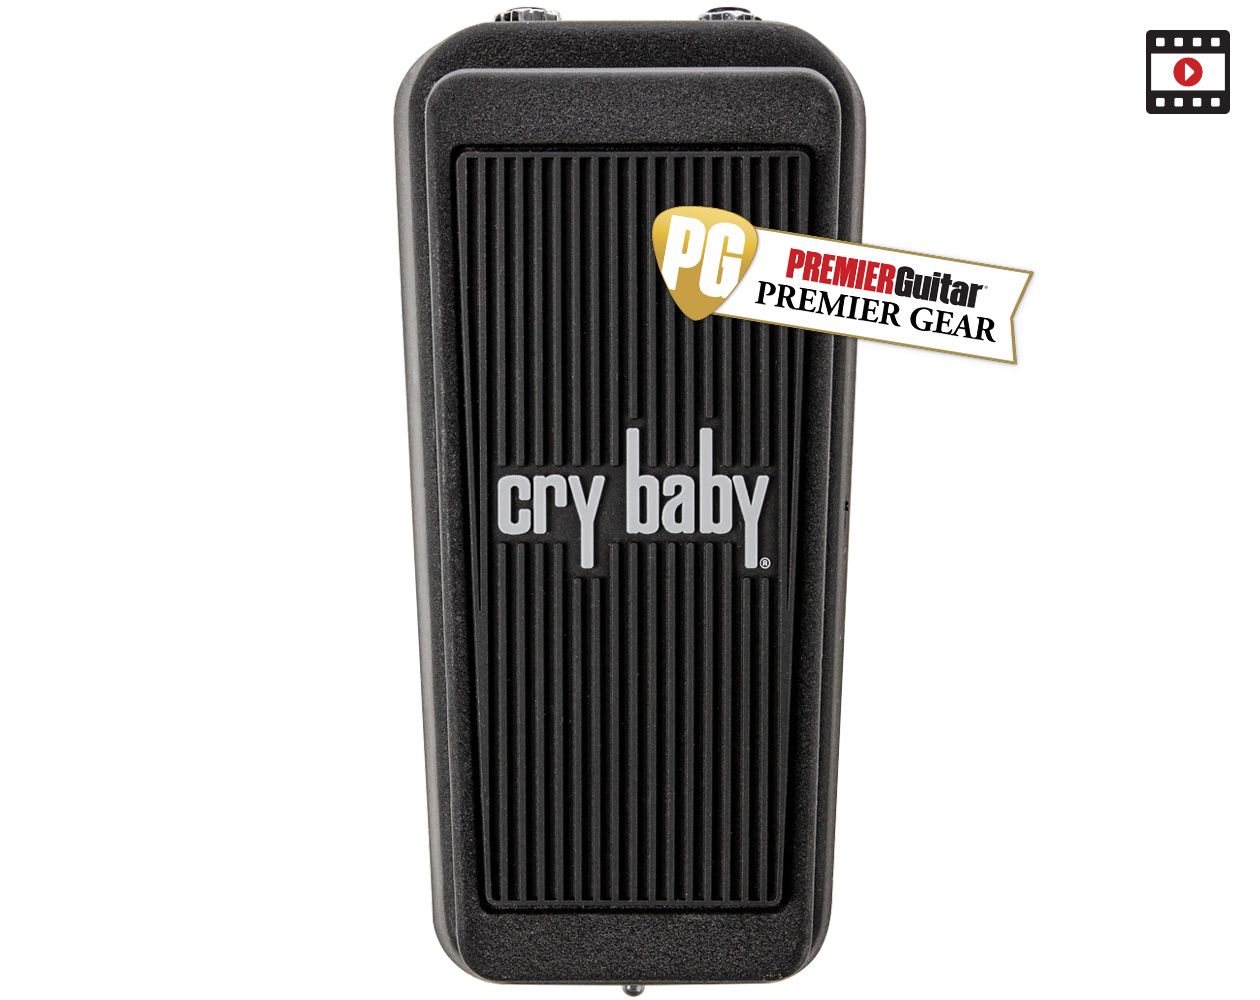 Dunlop Cry Baby Junior Review